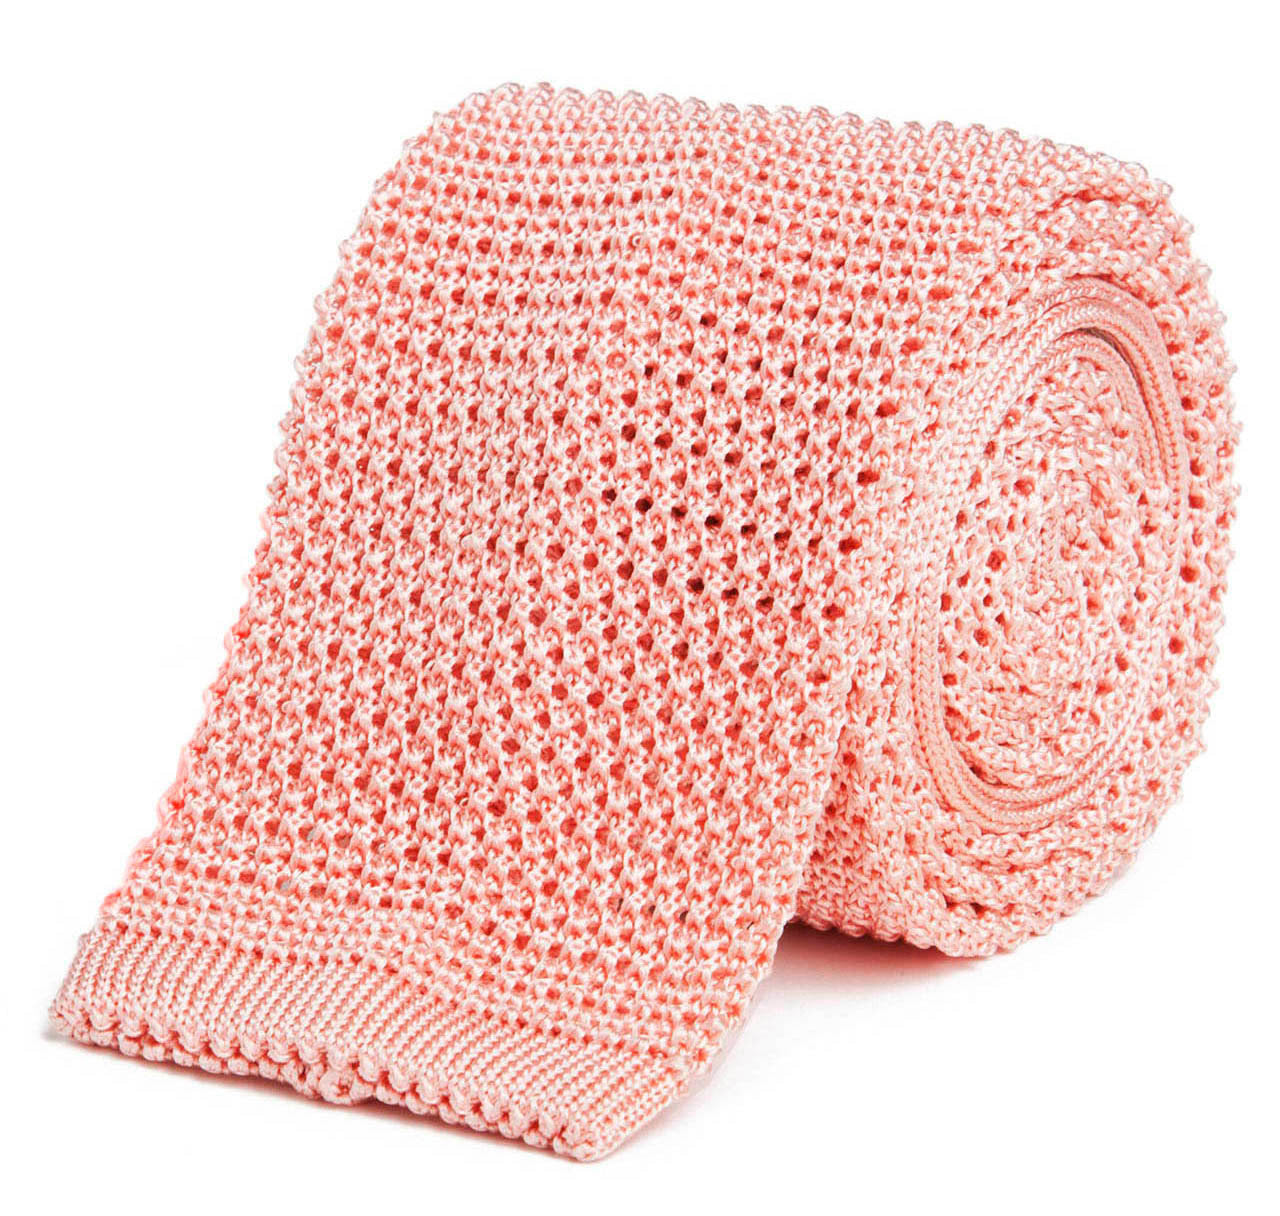 Classic Knit Silk Tie in Pink